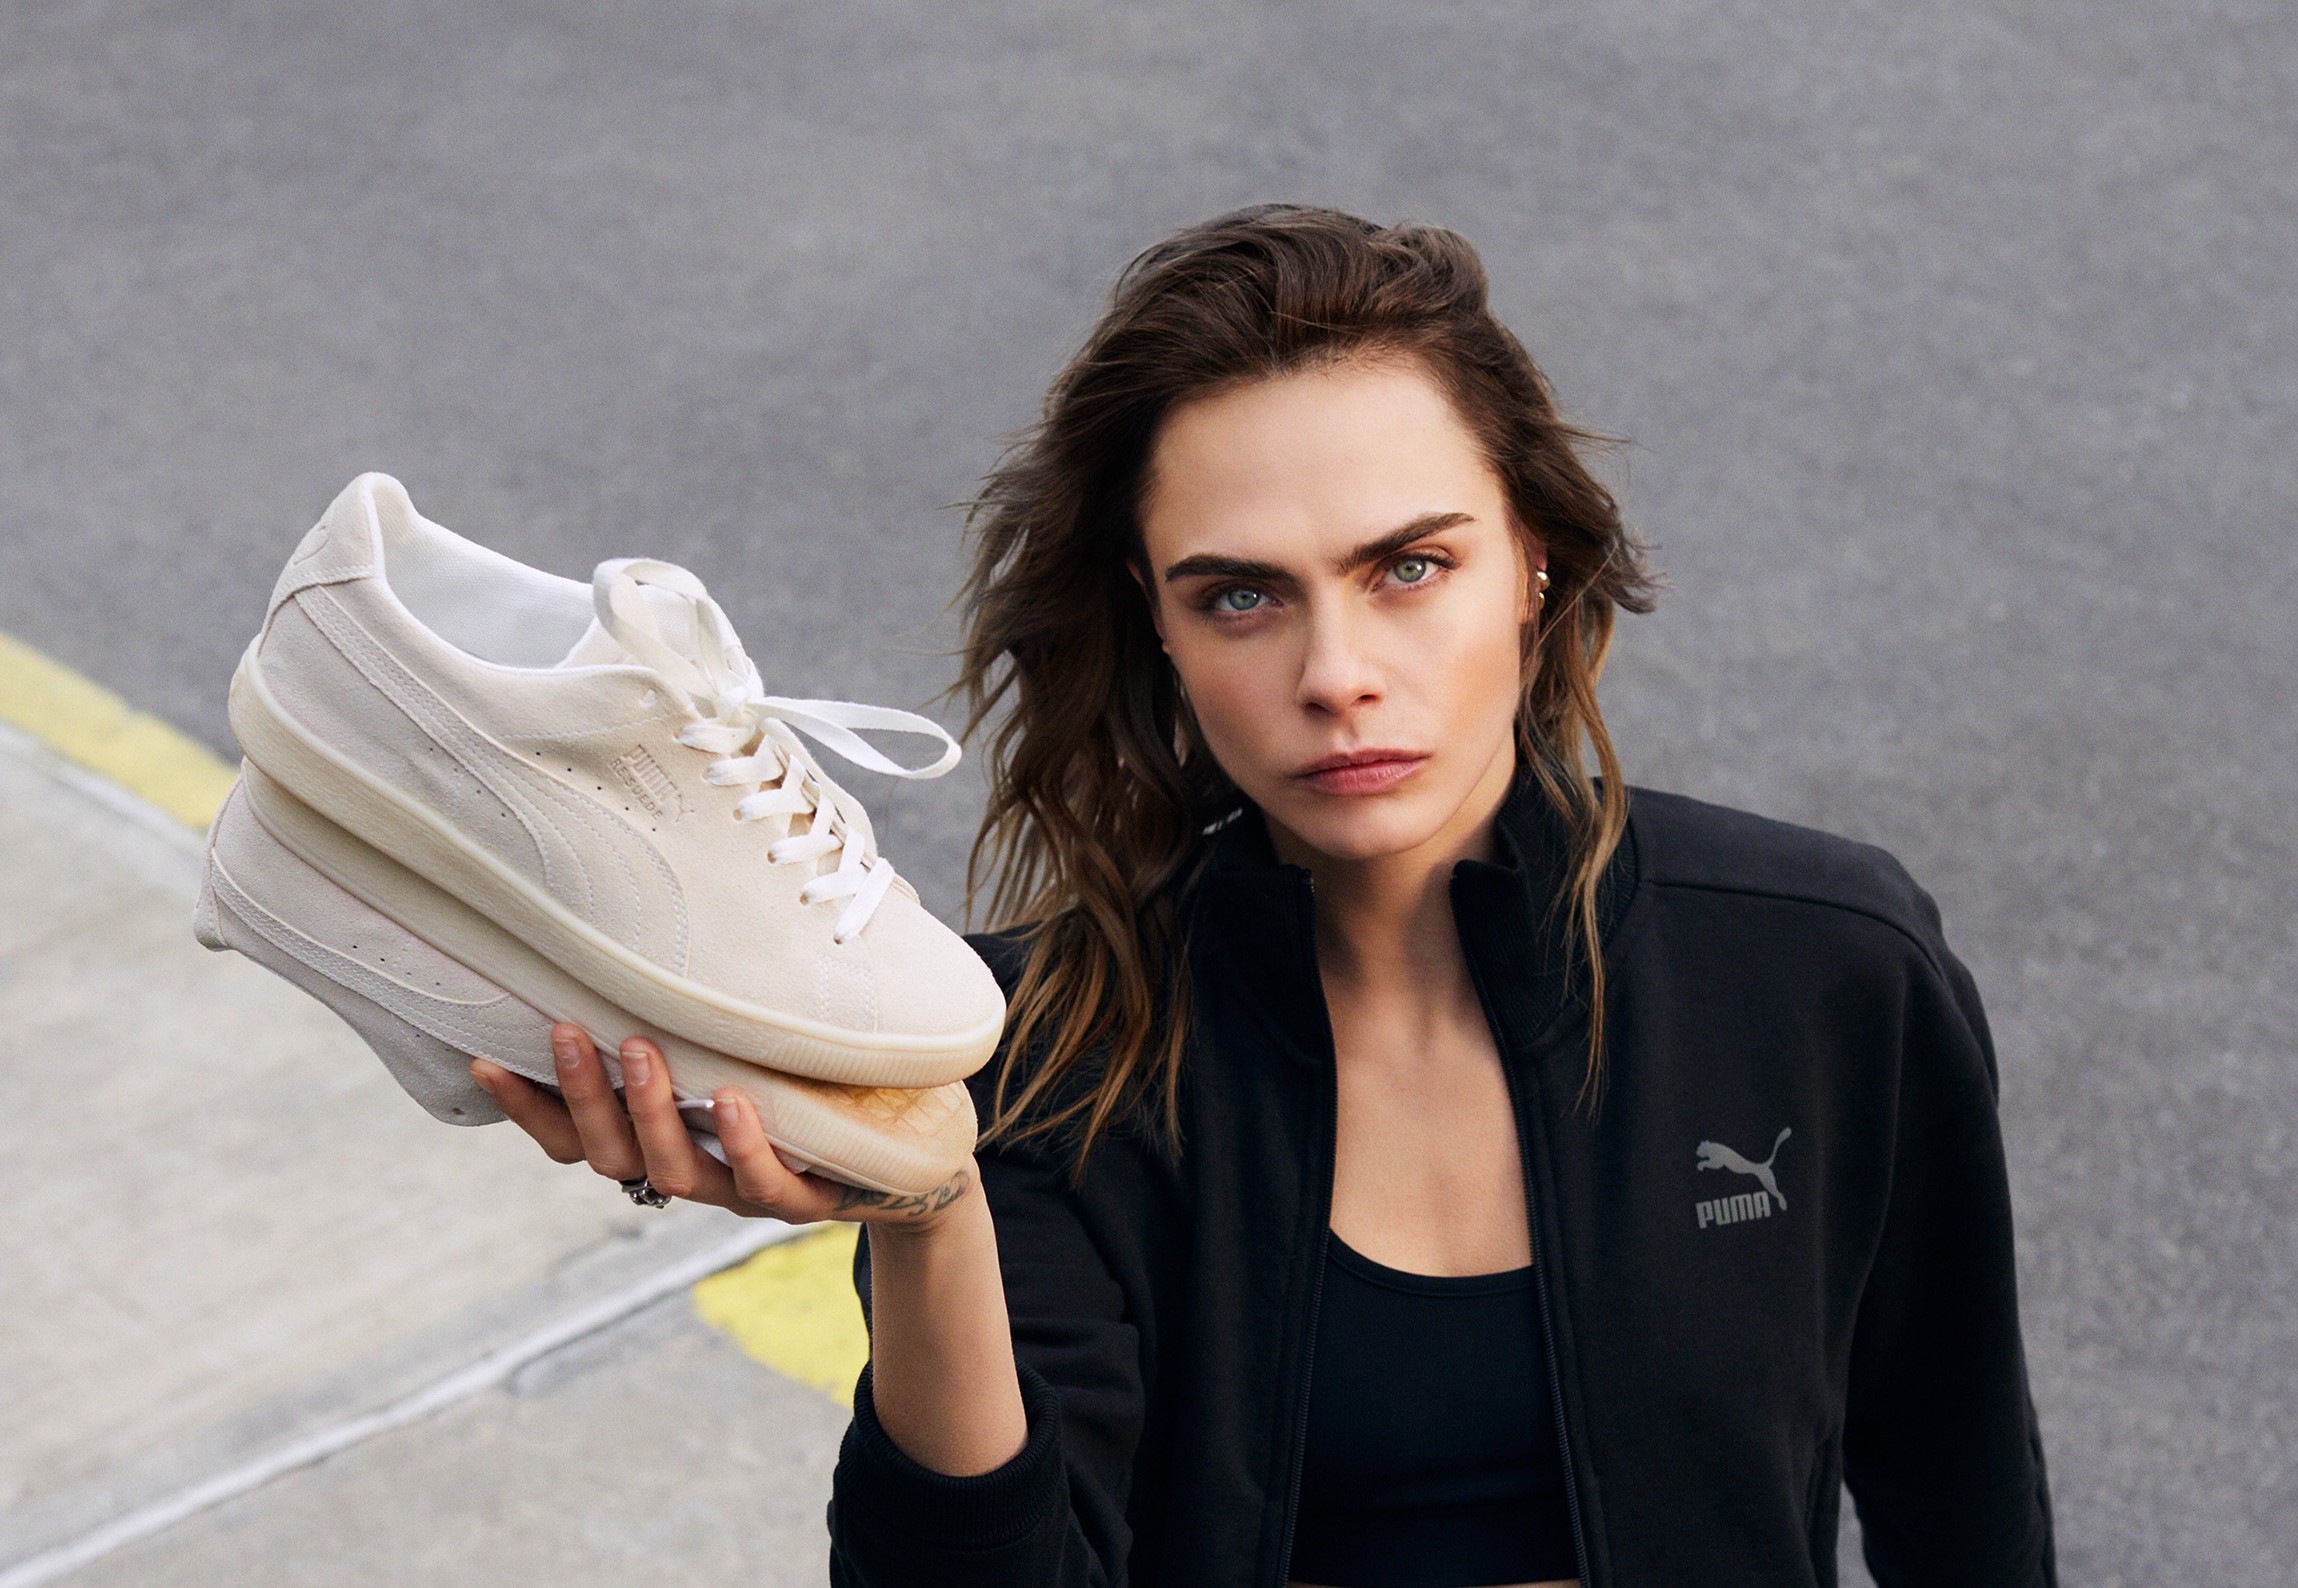 Puma launches Re:Suede experiment with distribution of 500 pairs of shoes